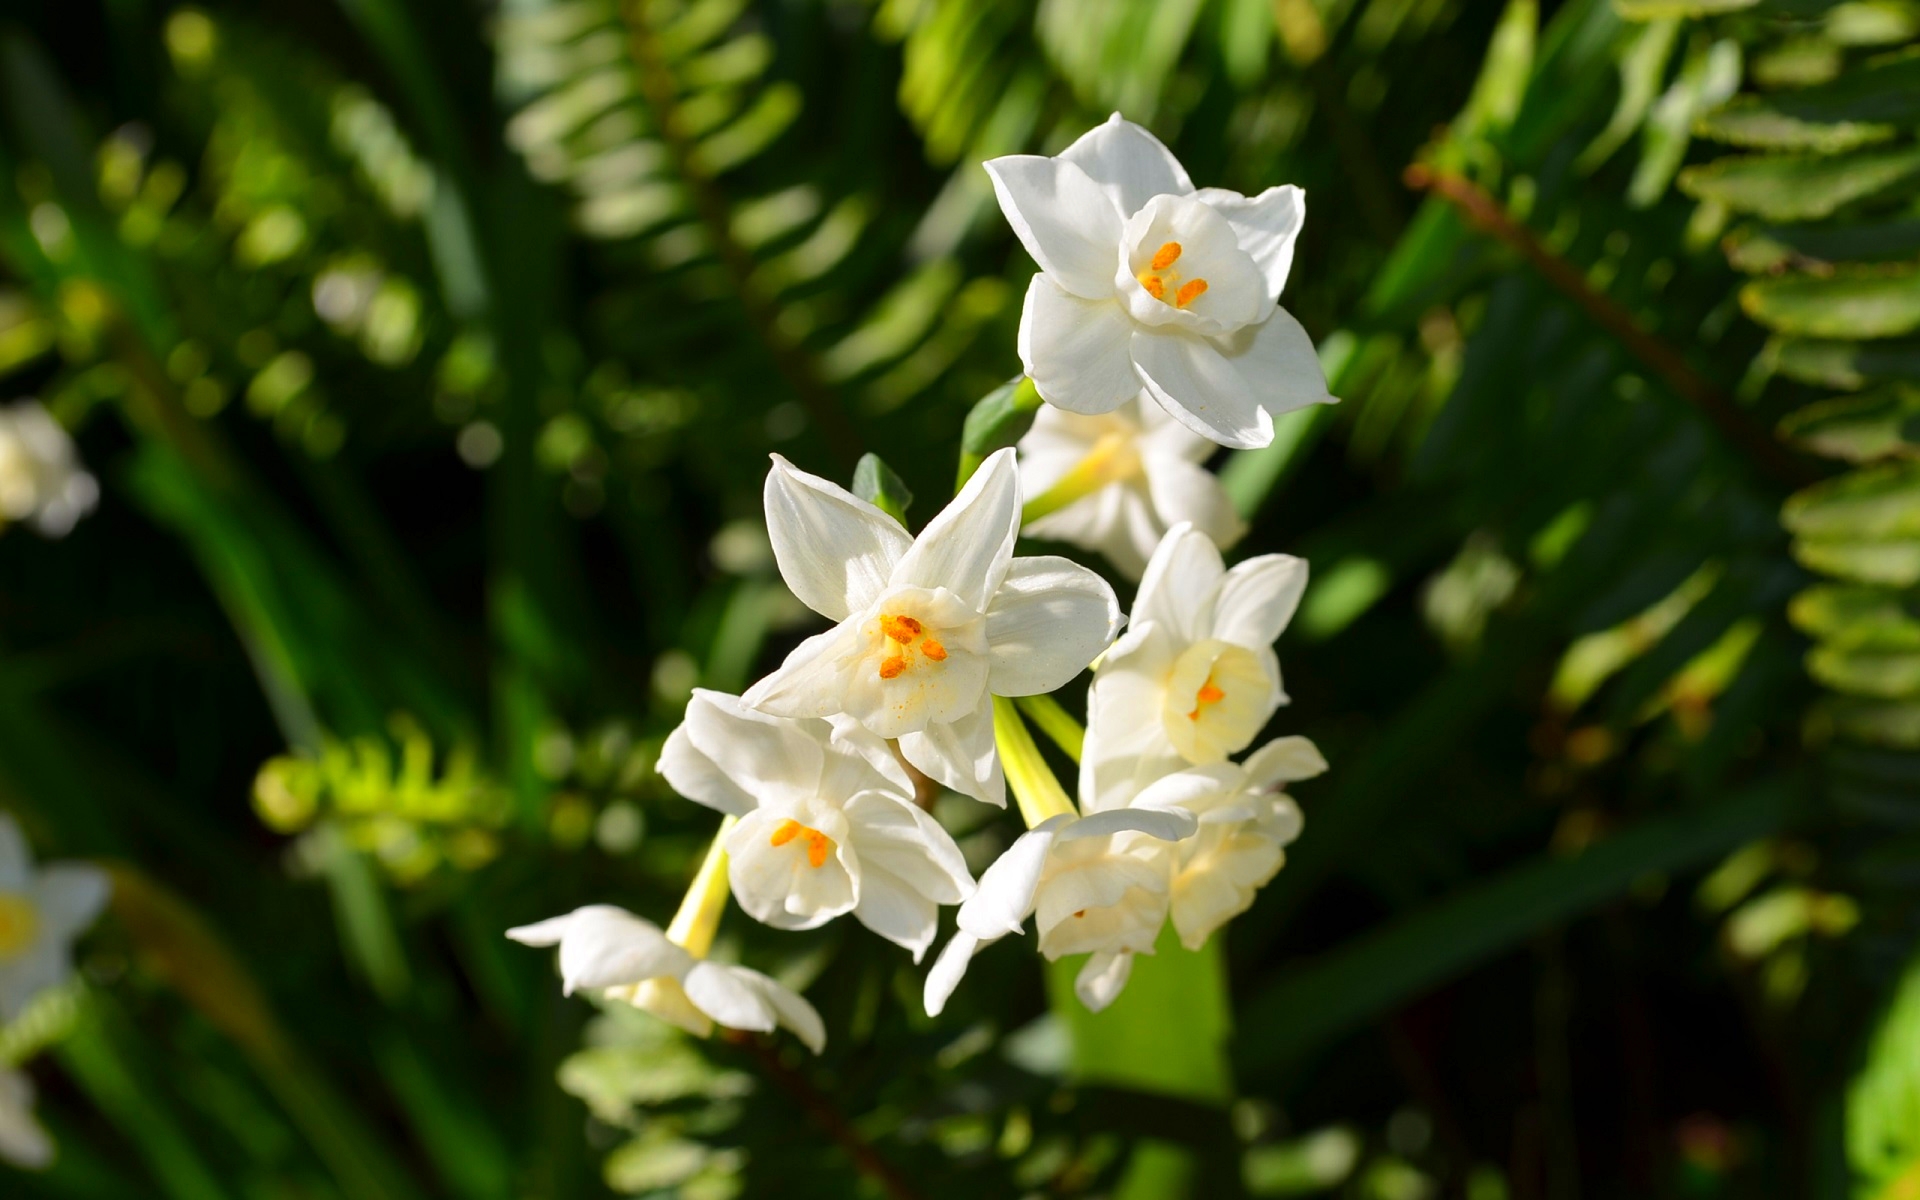 paperwhite narcissus, nature, daffodil, earth, blur, flower, narcissus, white flower, white, flowers